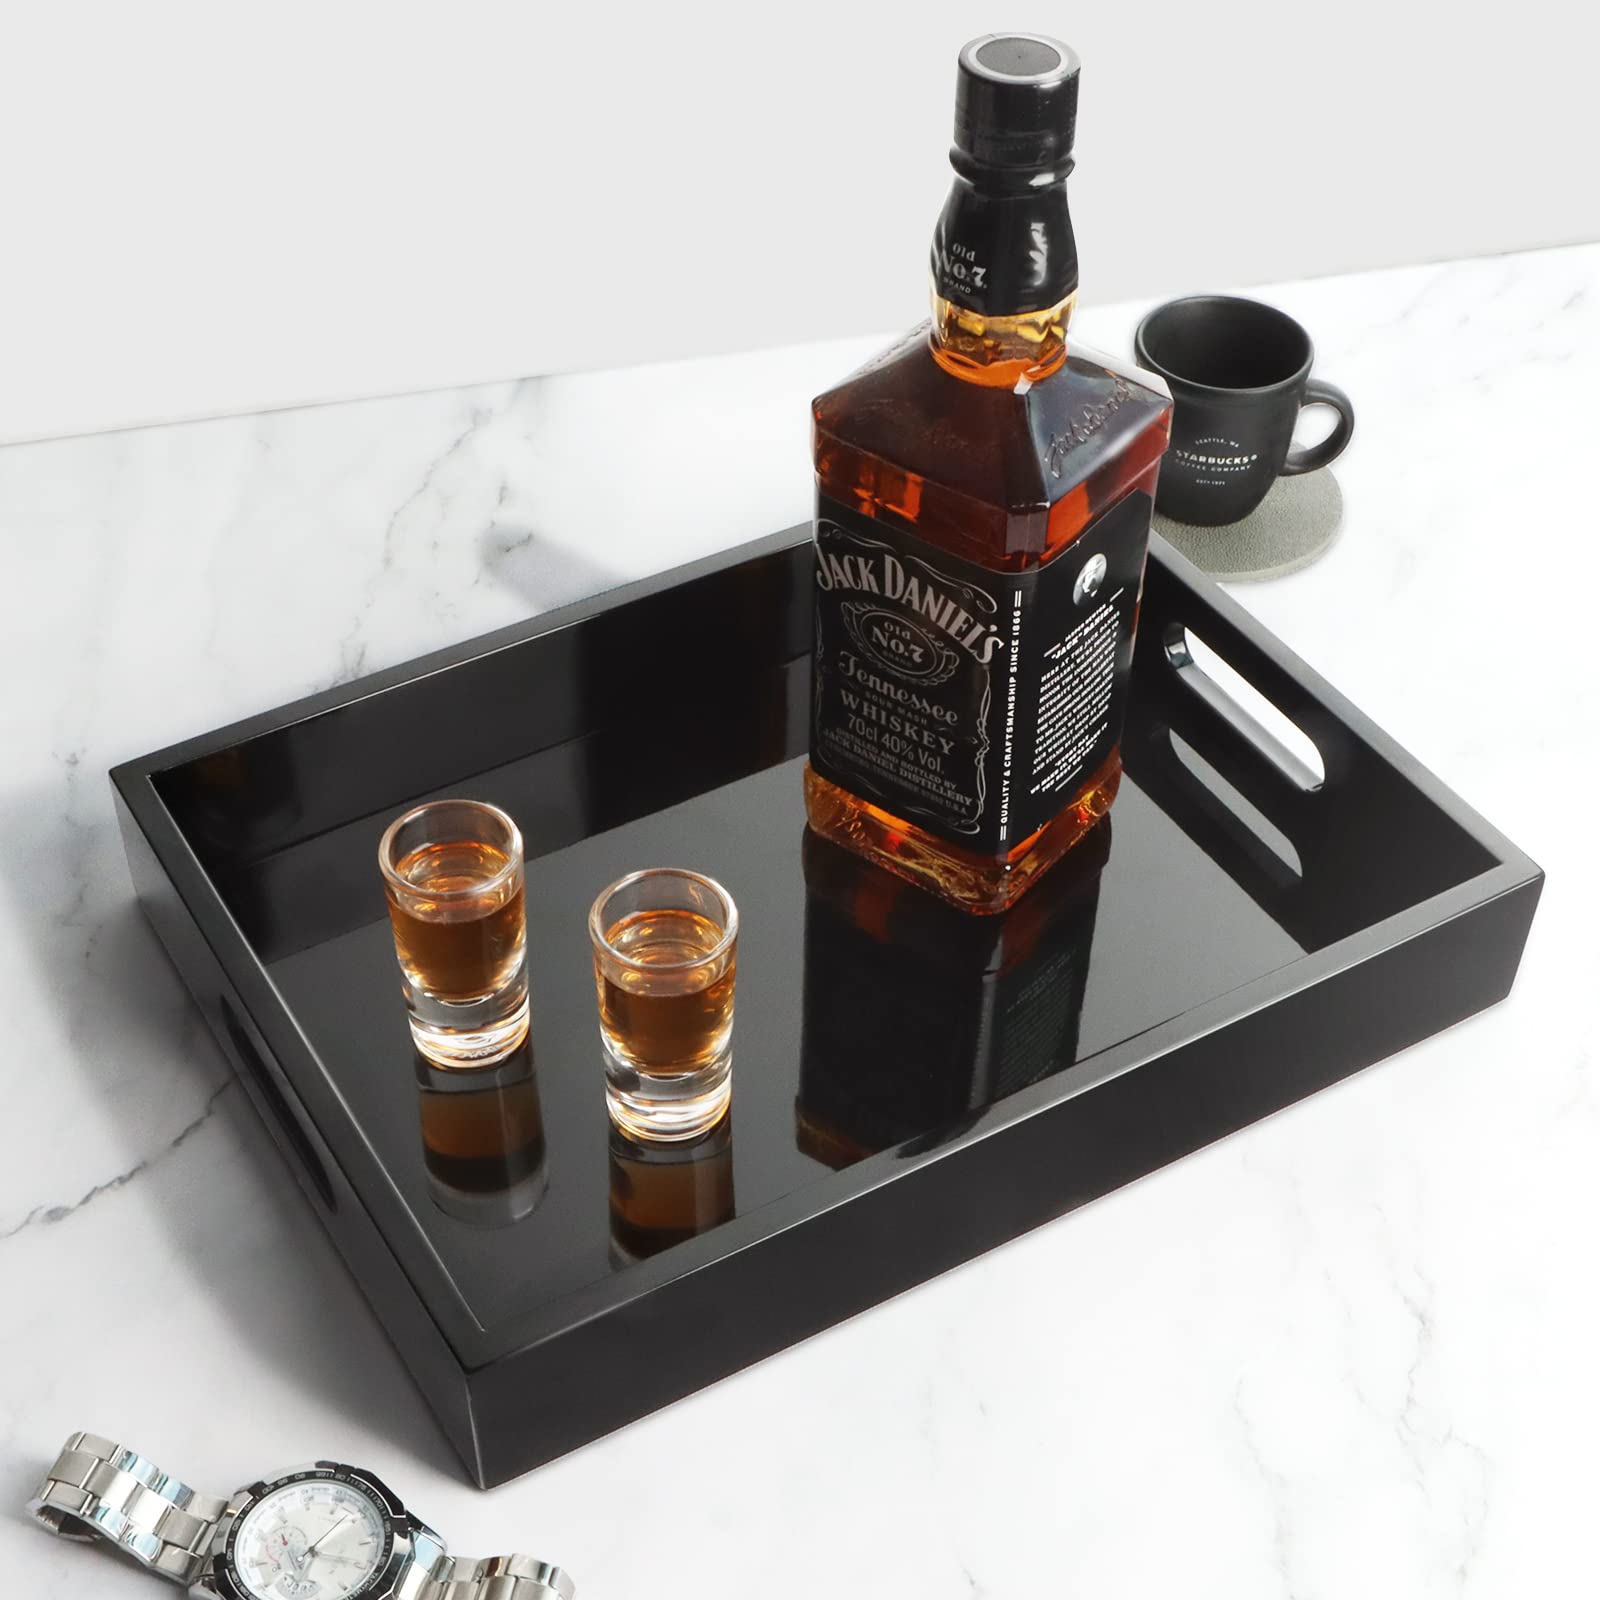 SANZIE Tray Wooden by high Gloss Paint,Serving Tray Easy to Handle for Breakfast and Coffee. Morden Tray in Office or Living Room for Storage Groceries. 13IN*9.4IN*2IN [Black]